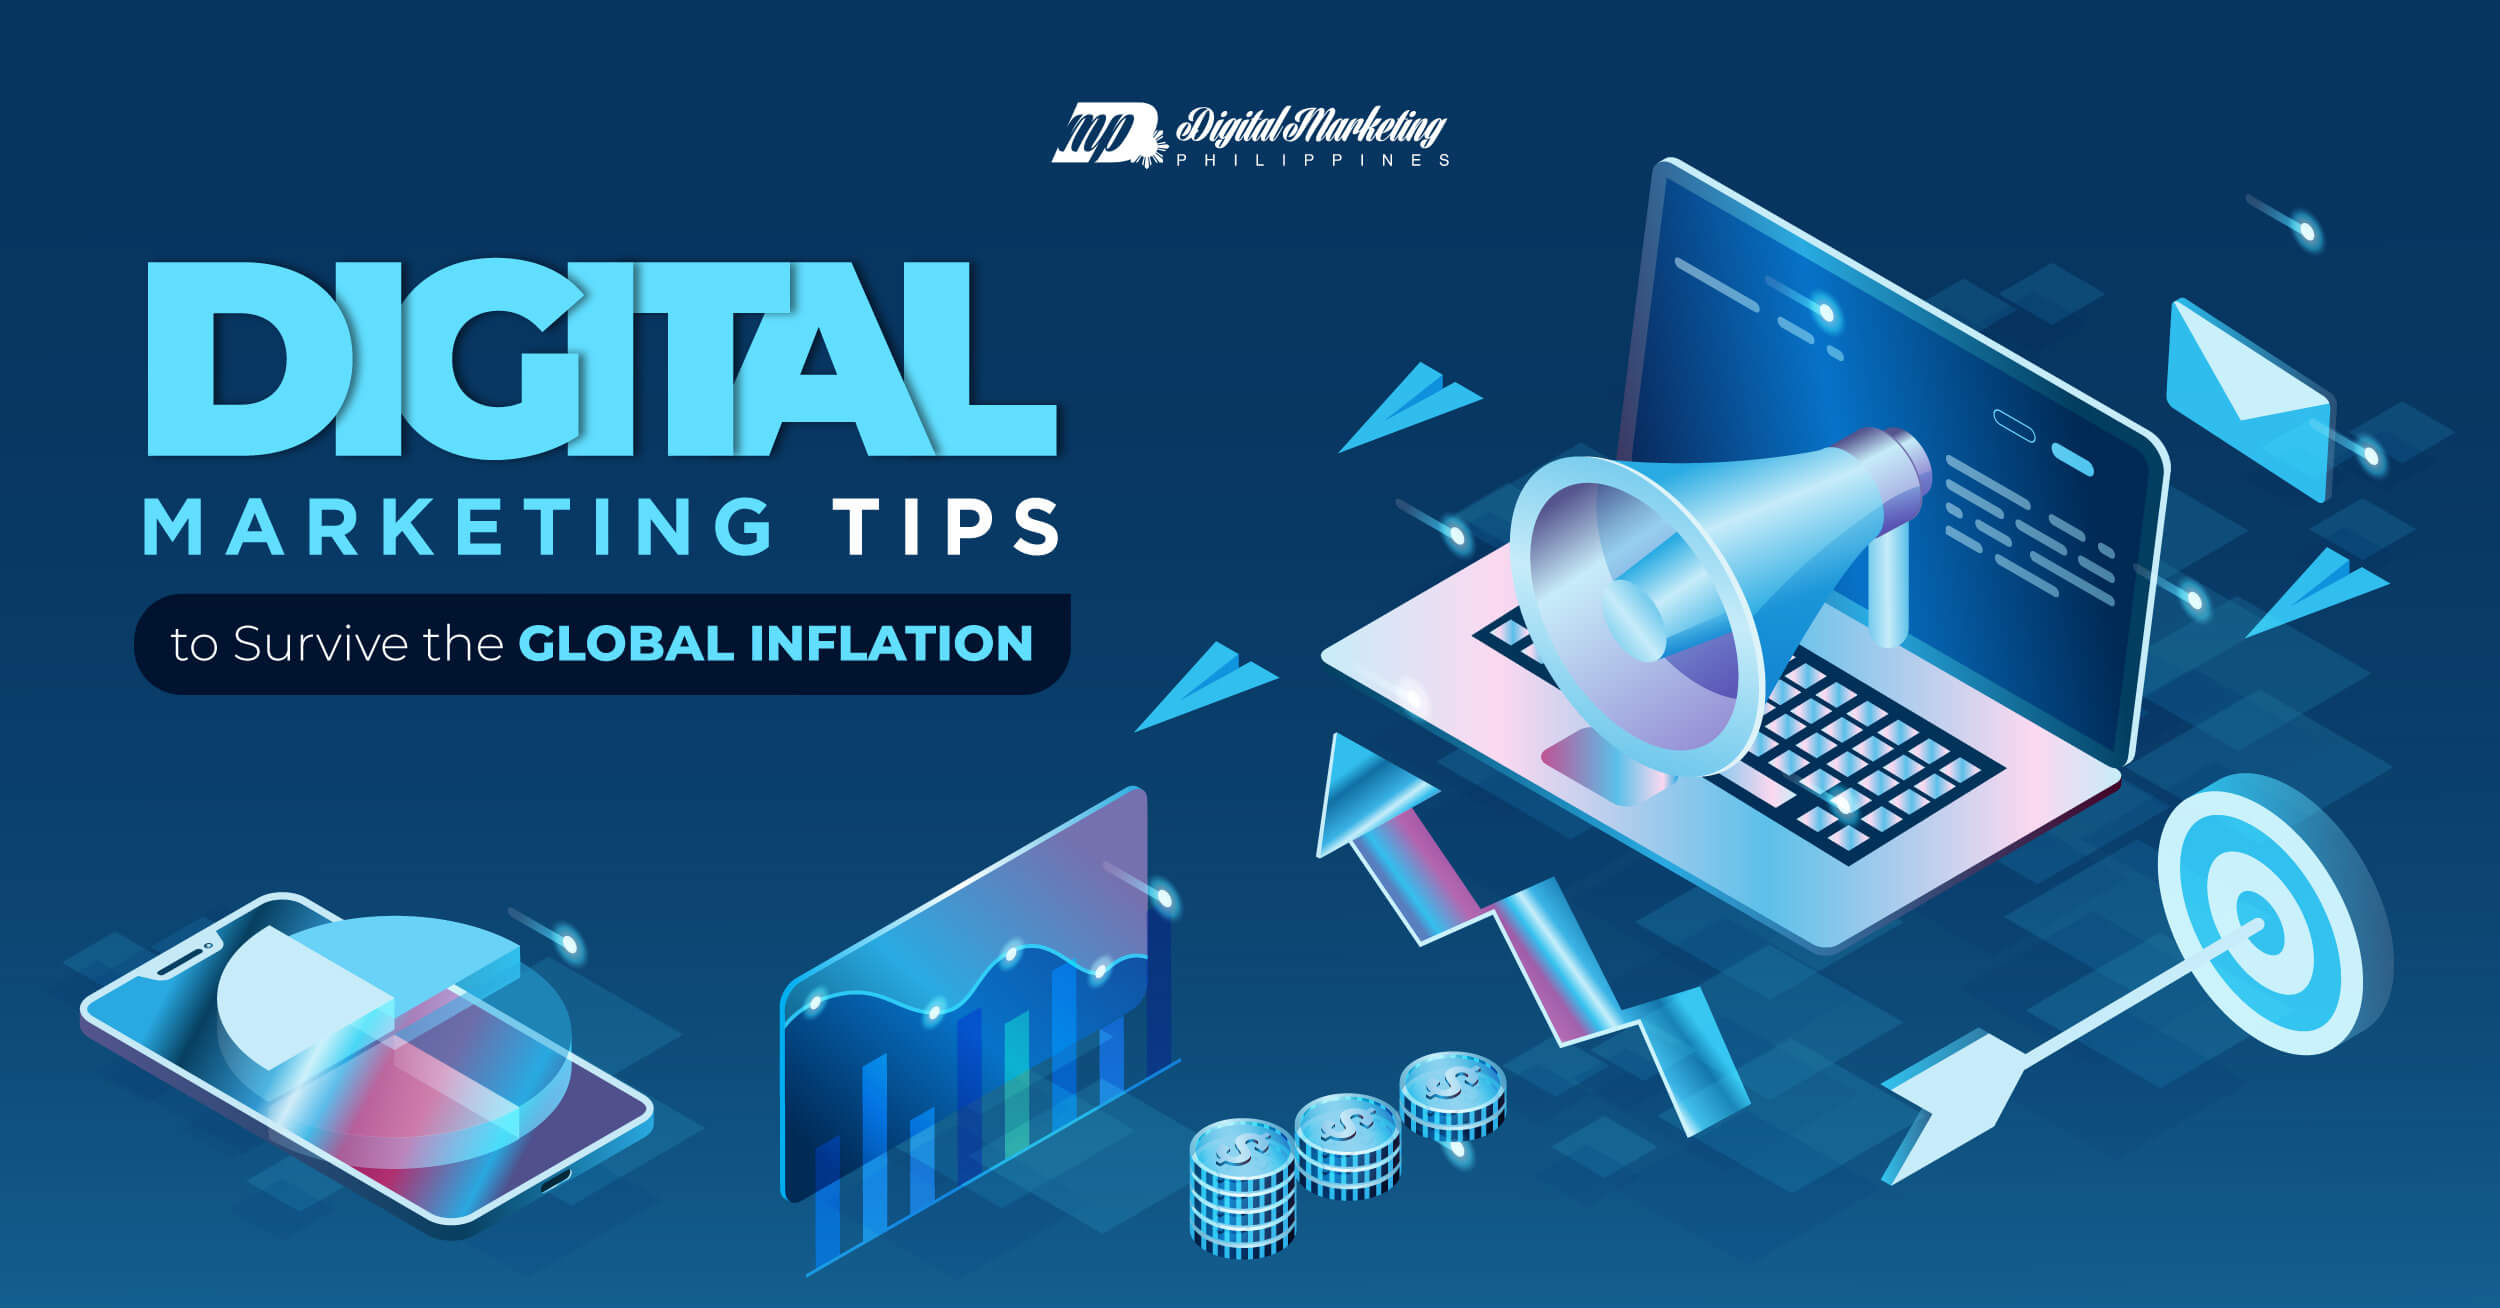 Digital Marketing Tips to Survive the Global Inflation featured image